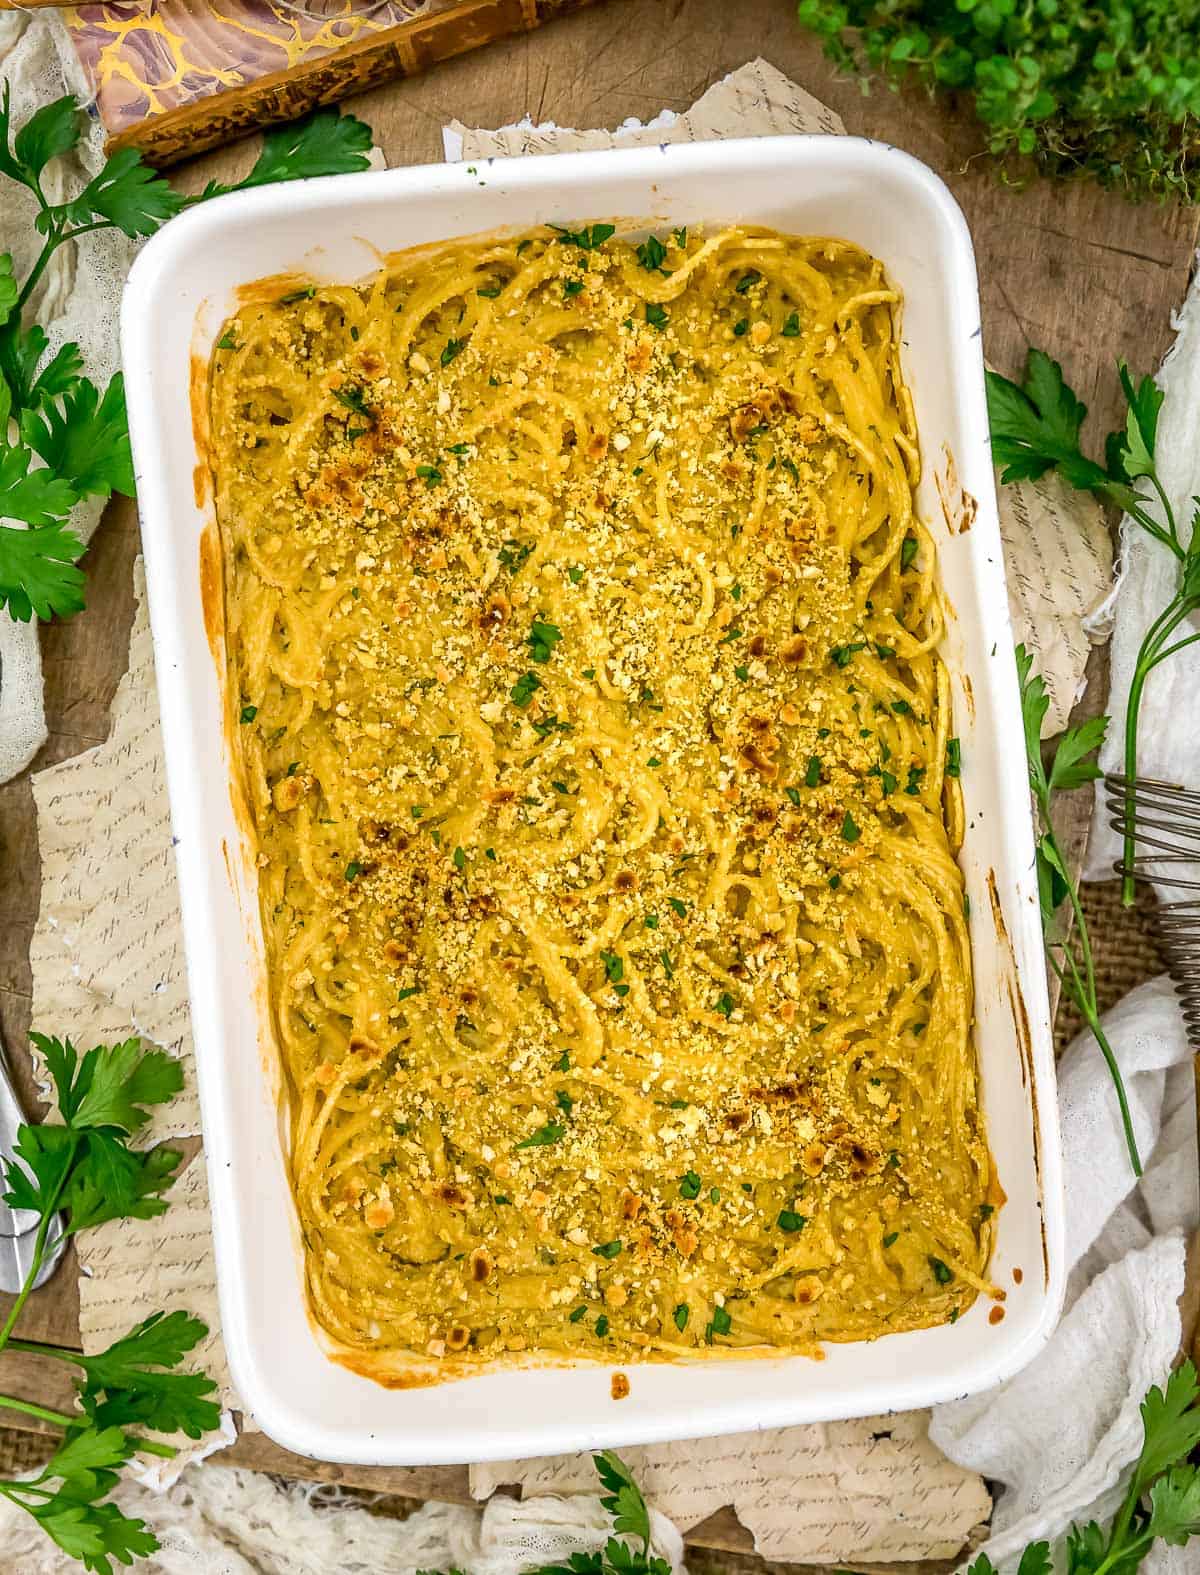 Dish of Vegan French Onion Noodle Casserole